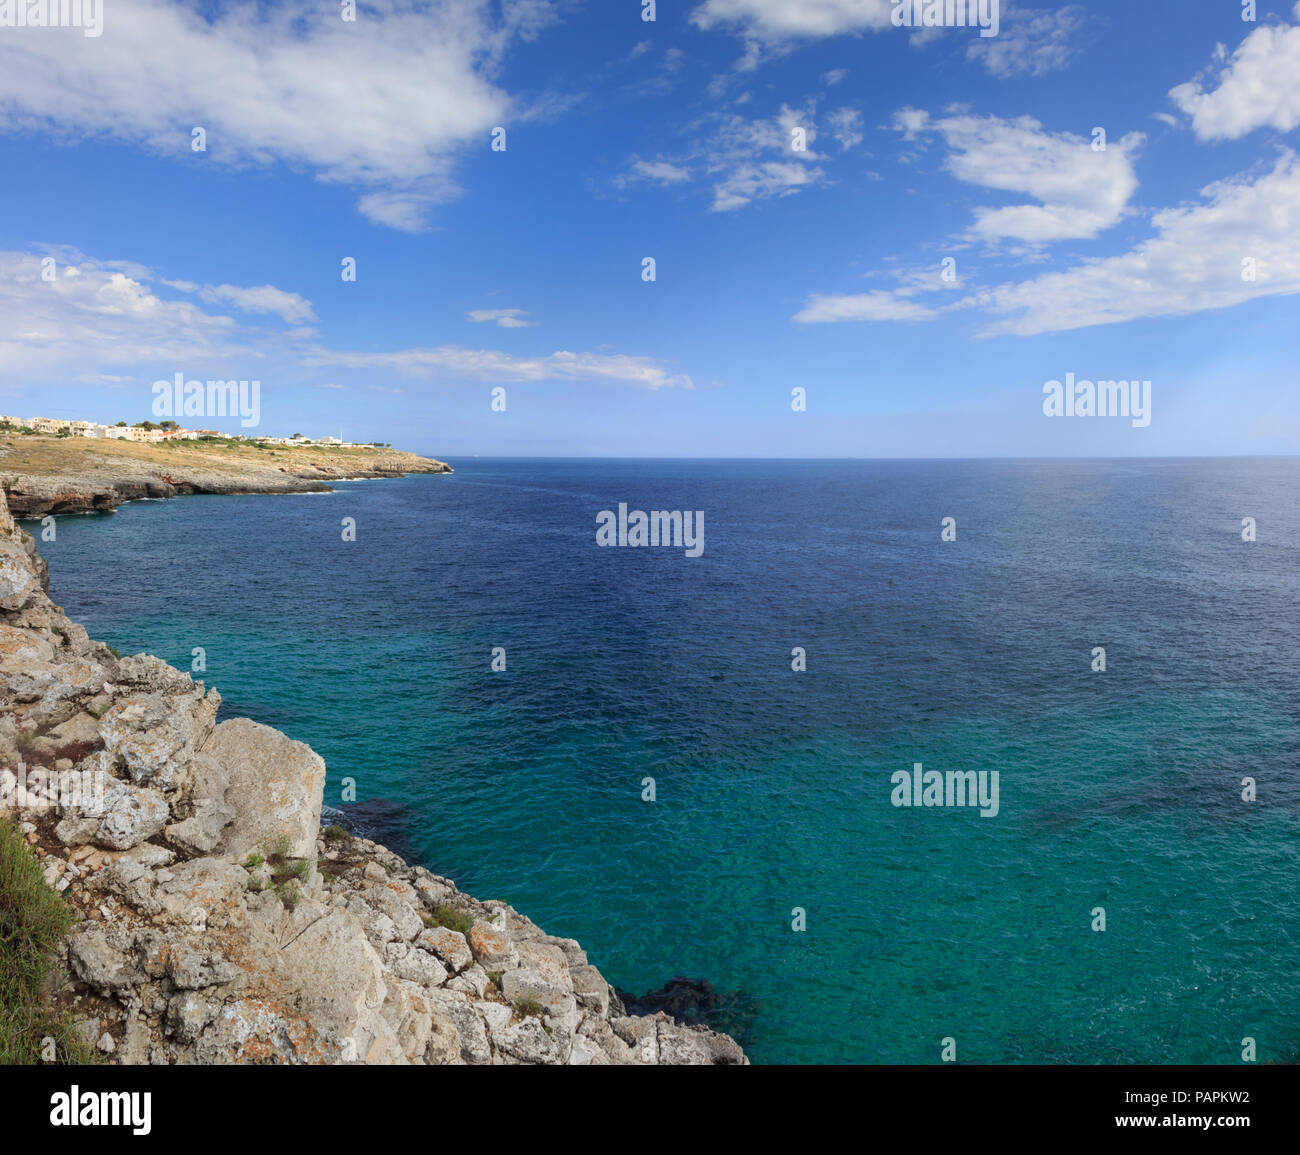 Coastline of Santa Maria di Leuca, the southernmost point of Italy, Apulia, (Salento). Beauty of natural rocks and sea at the very end of Italy. Stock Photo